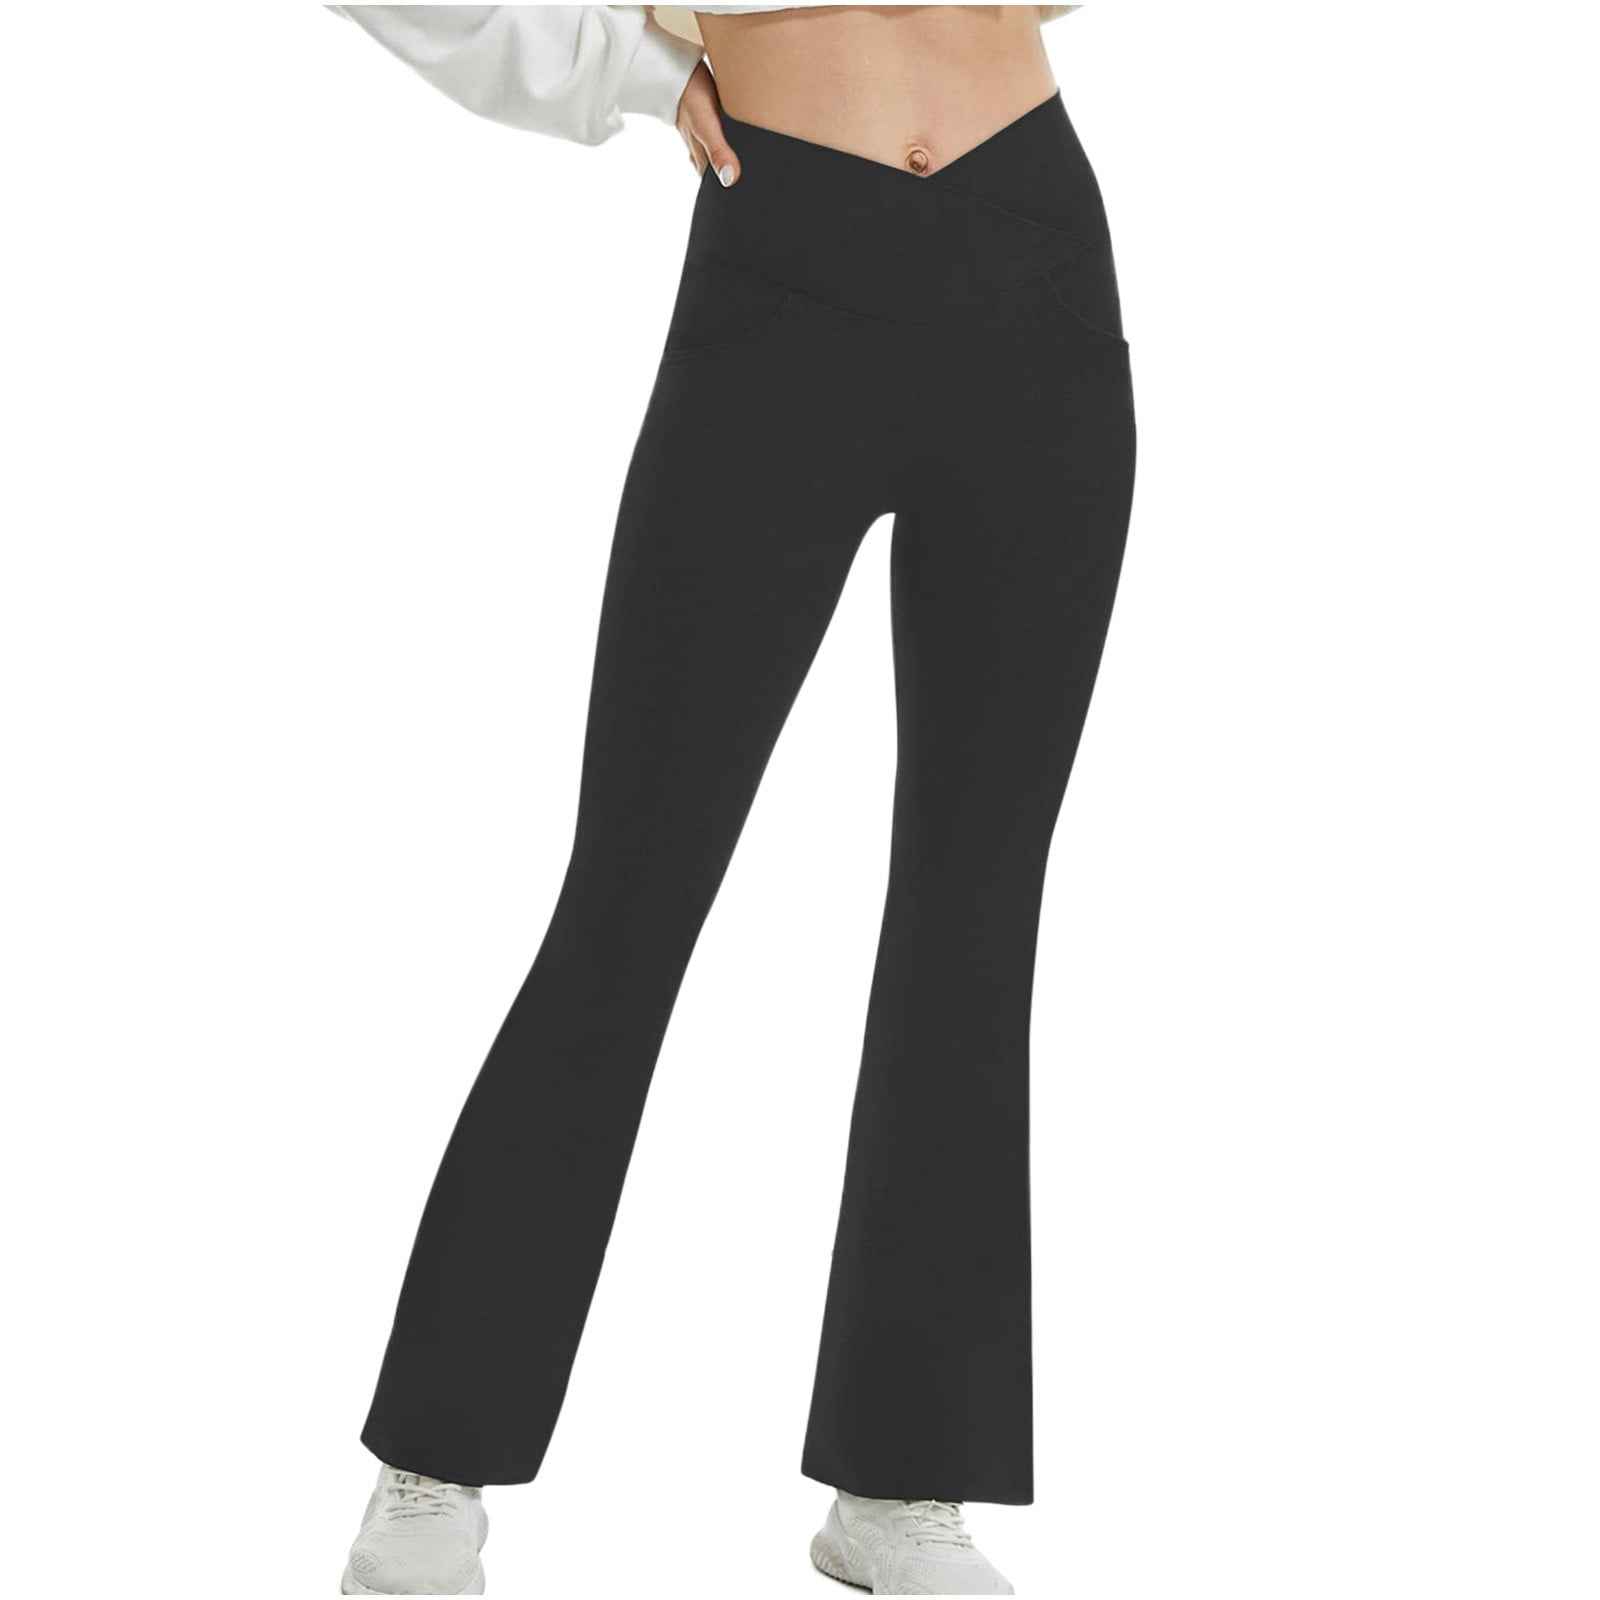 Taqqpue Womens Flare Yoga Pants with Pockets Casual Soft High